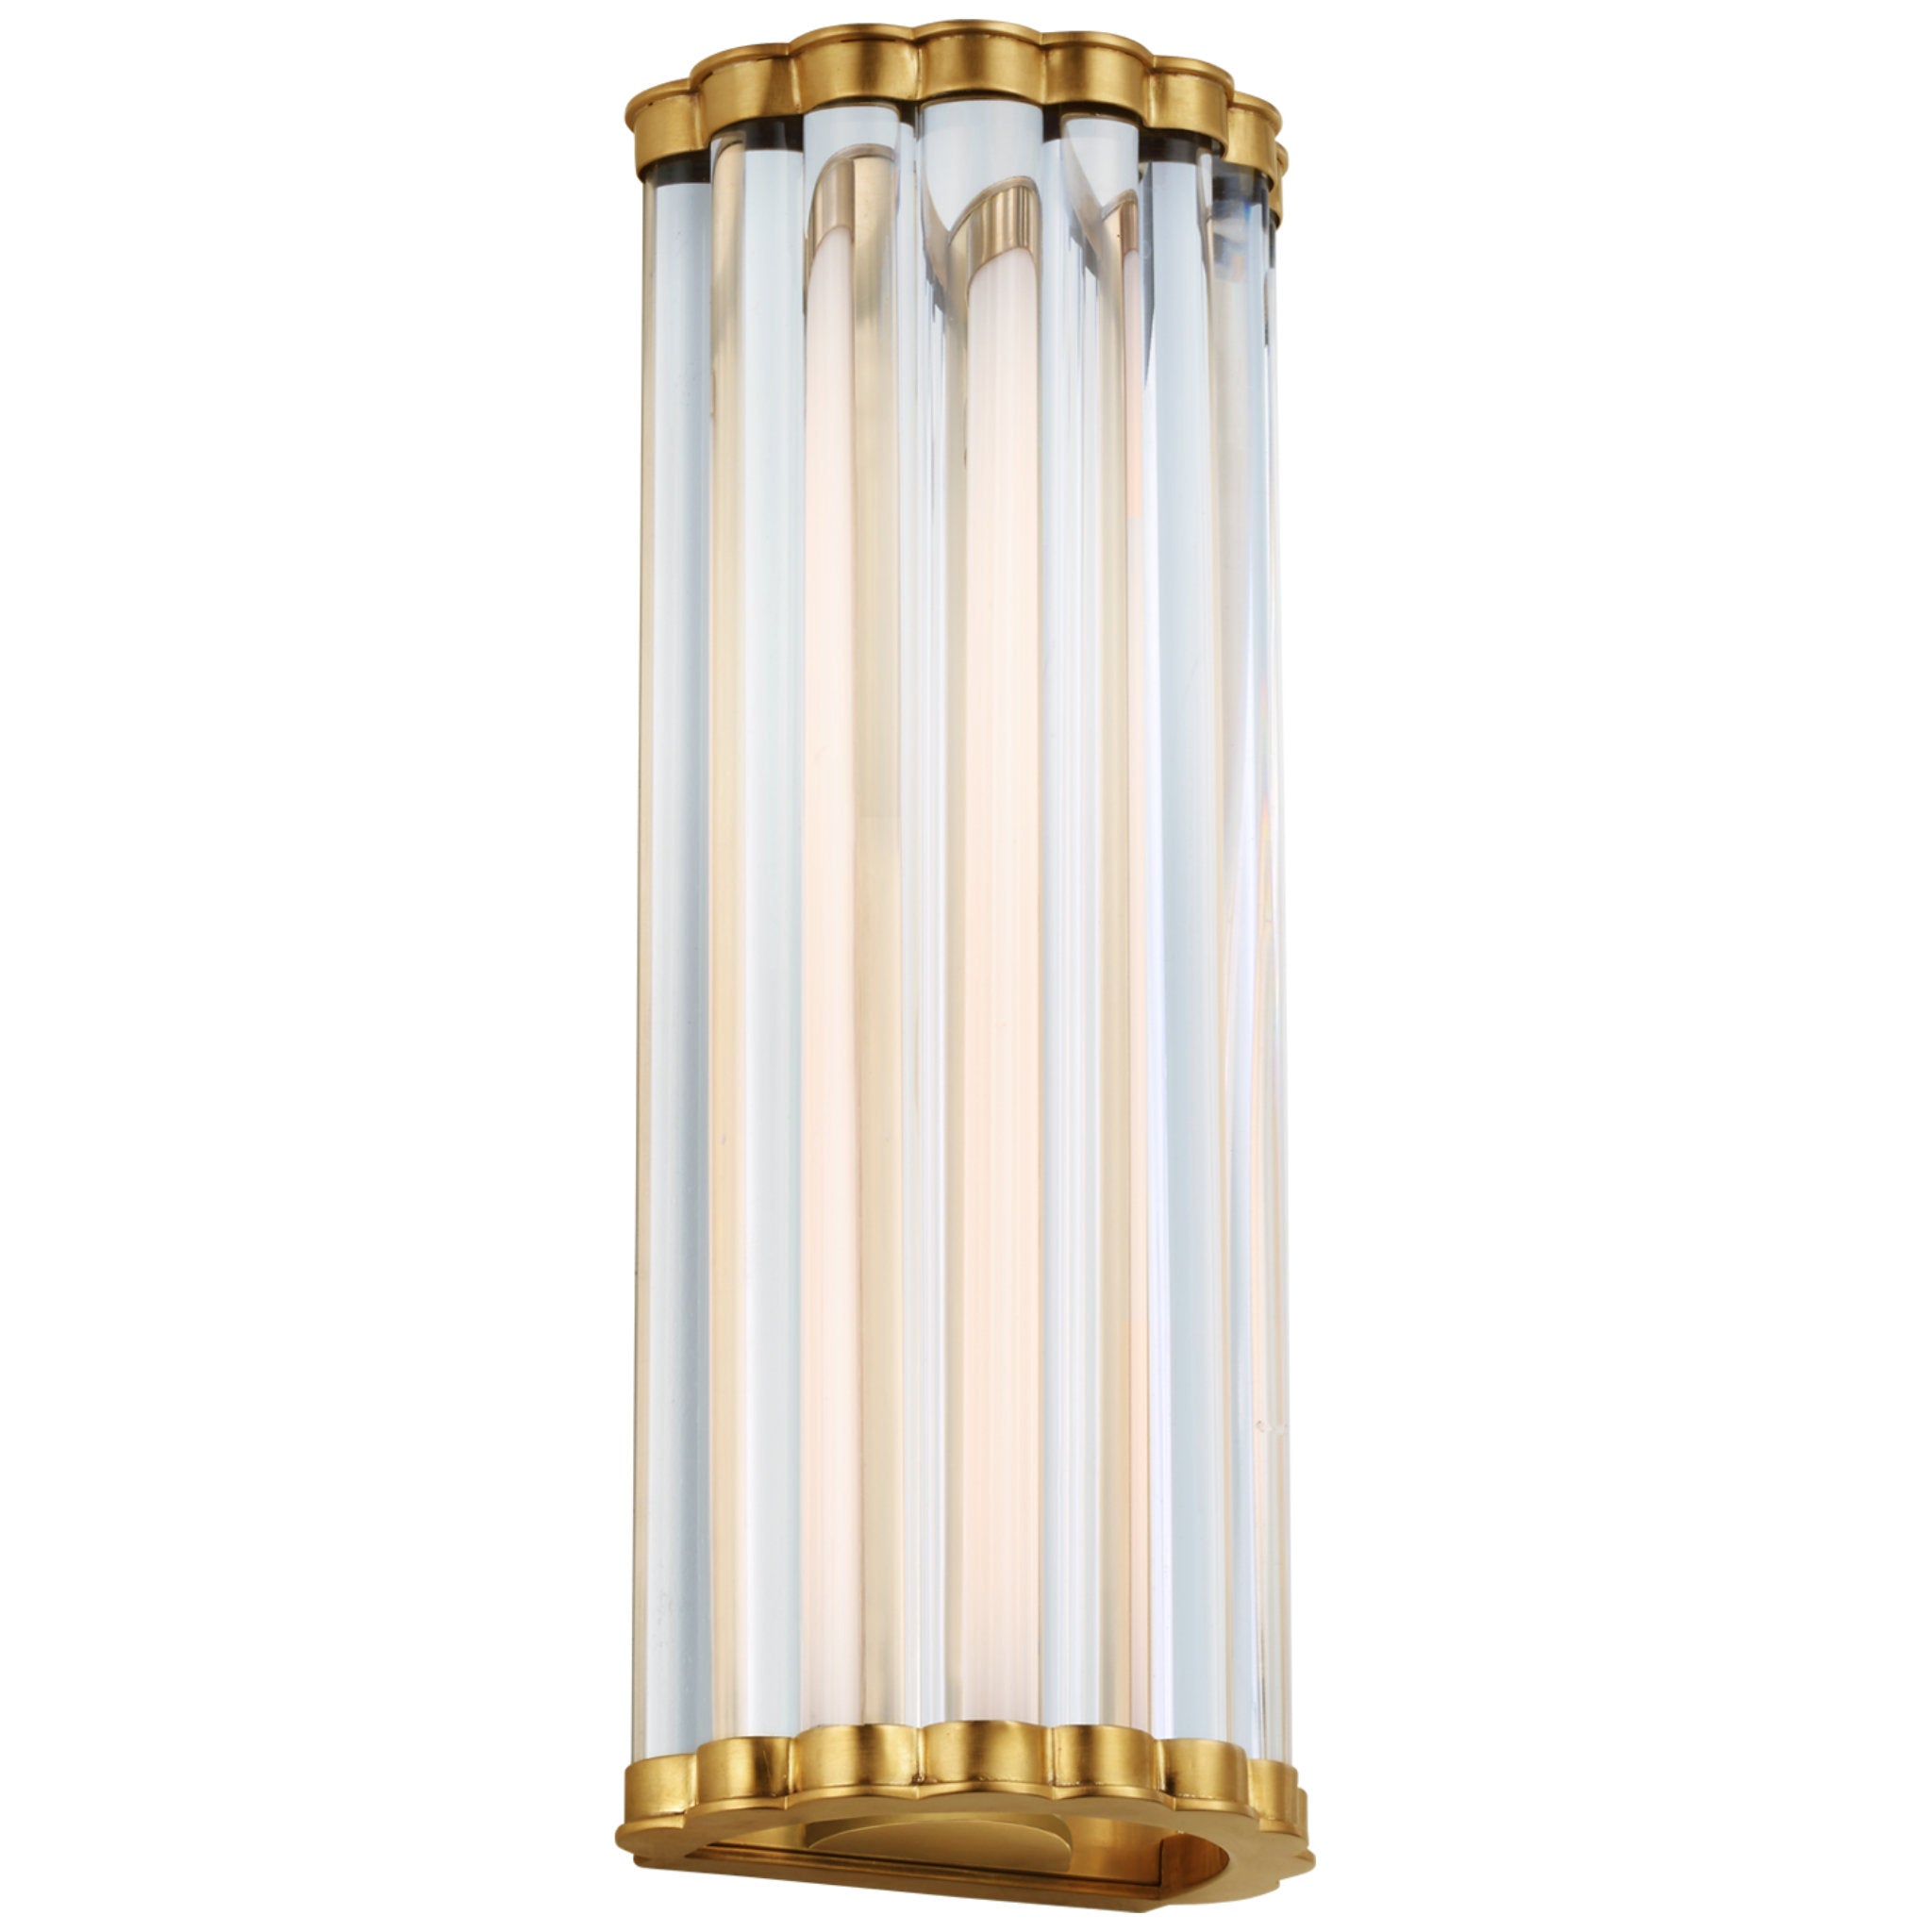 Chapman & Myers Kean 14" Sconce in Antique-Burnished Brass with Clear Glass Rods